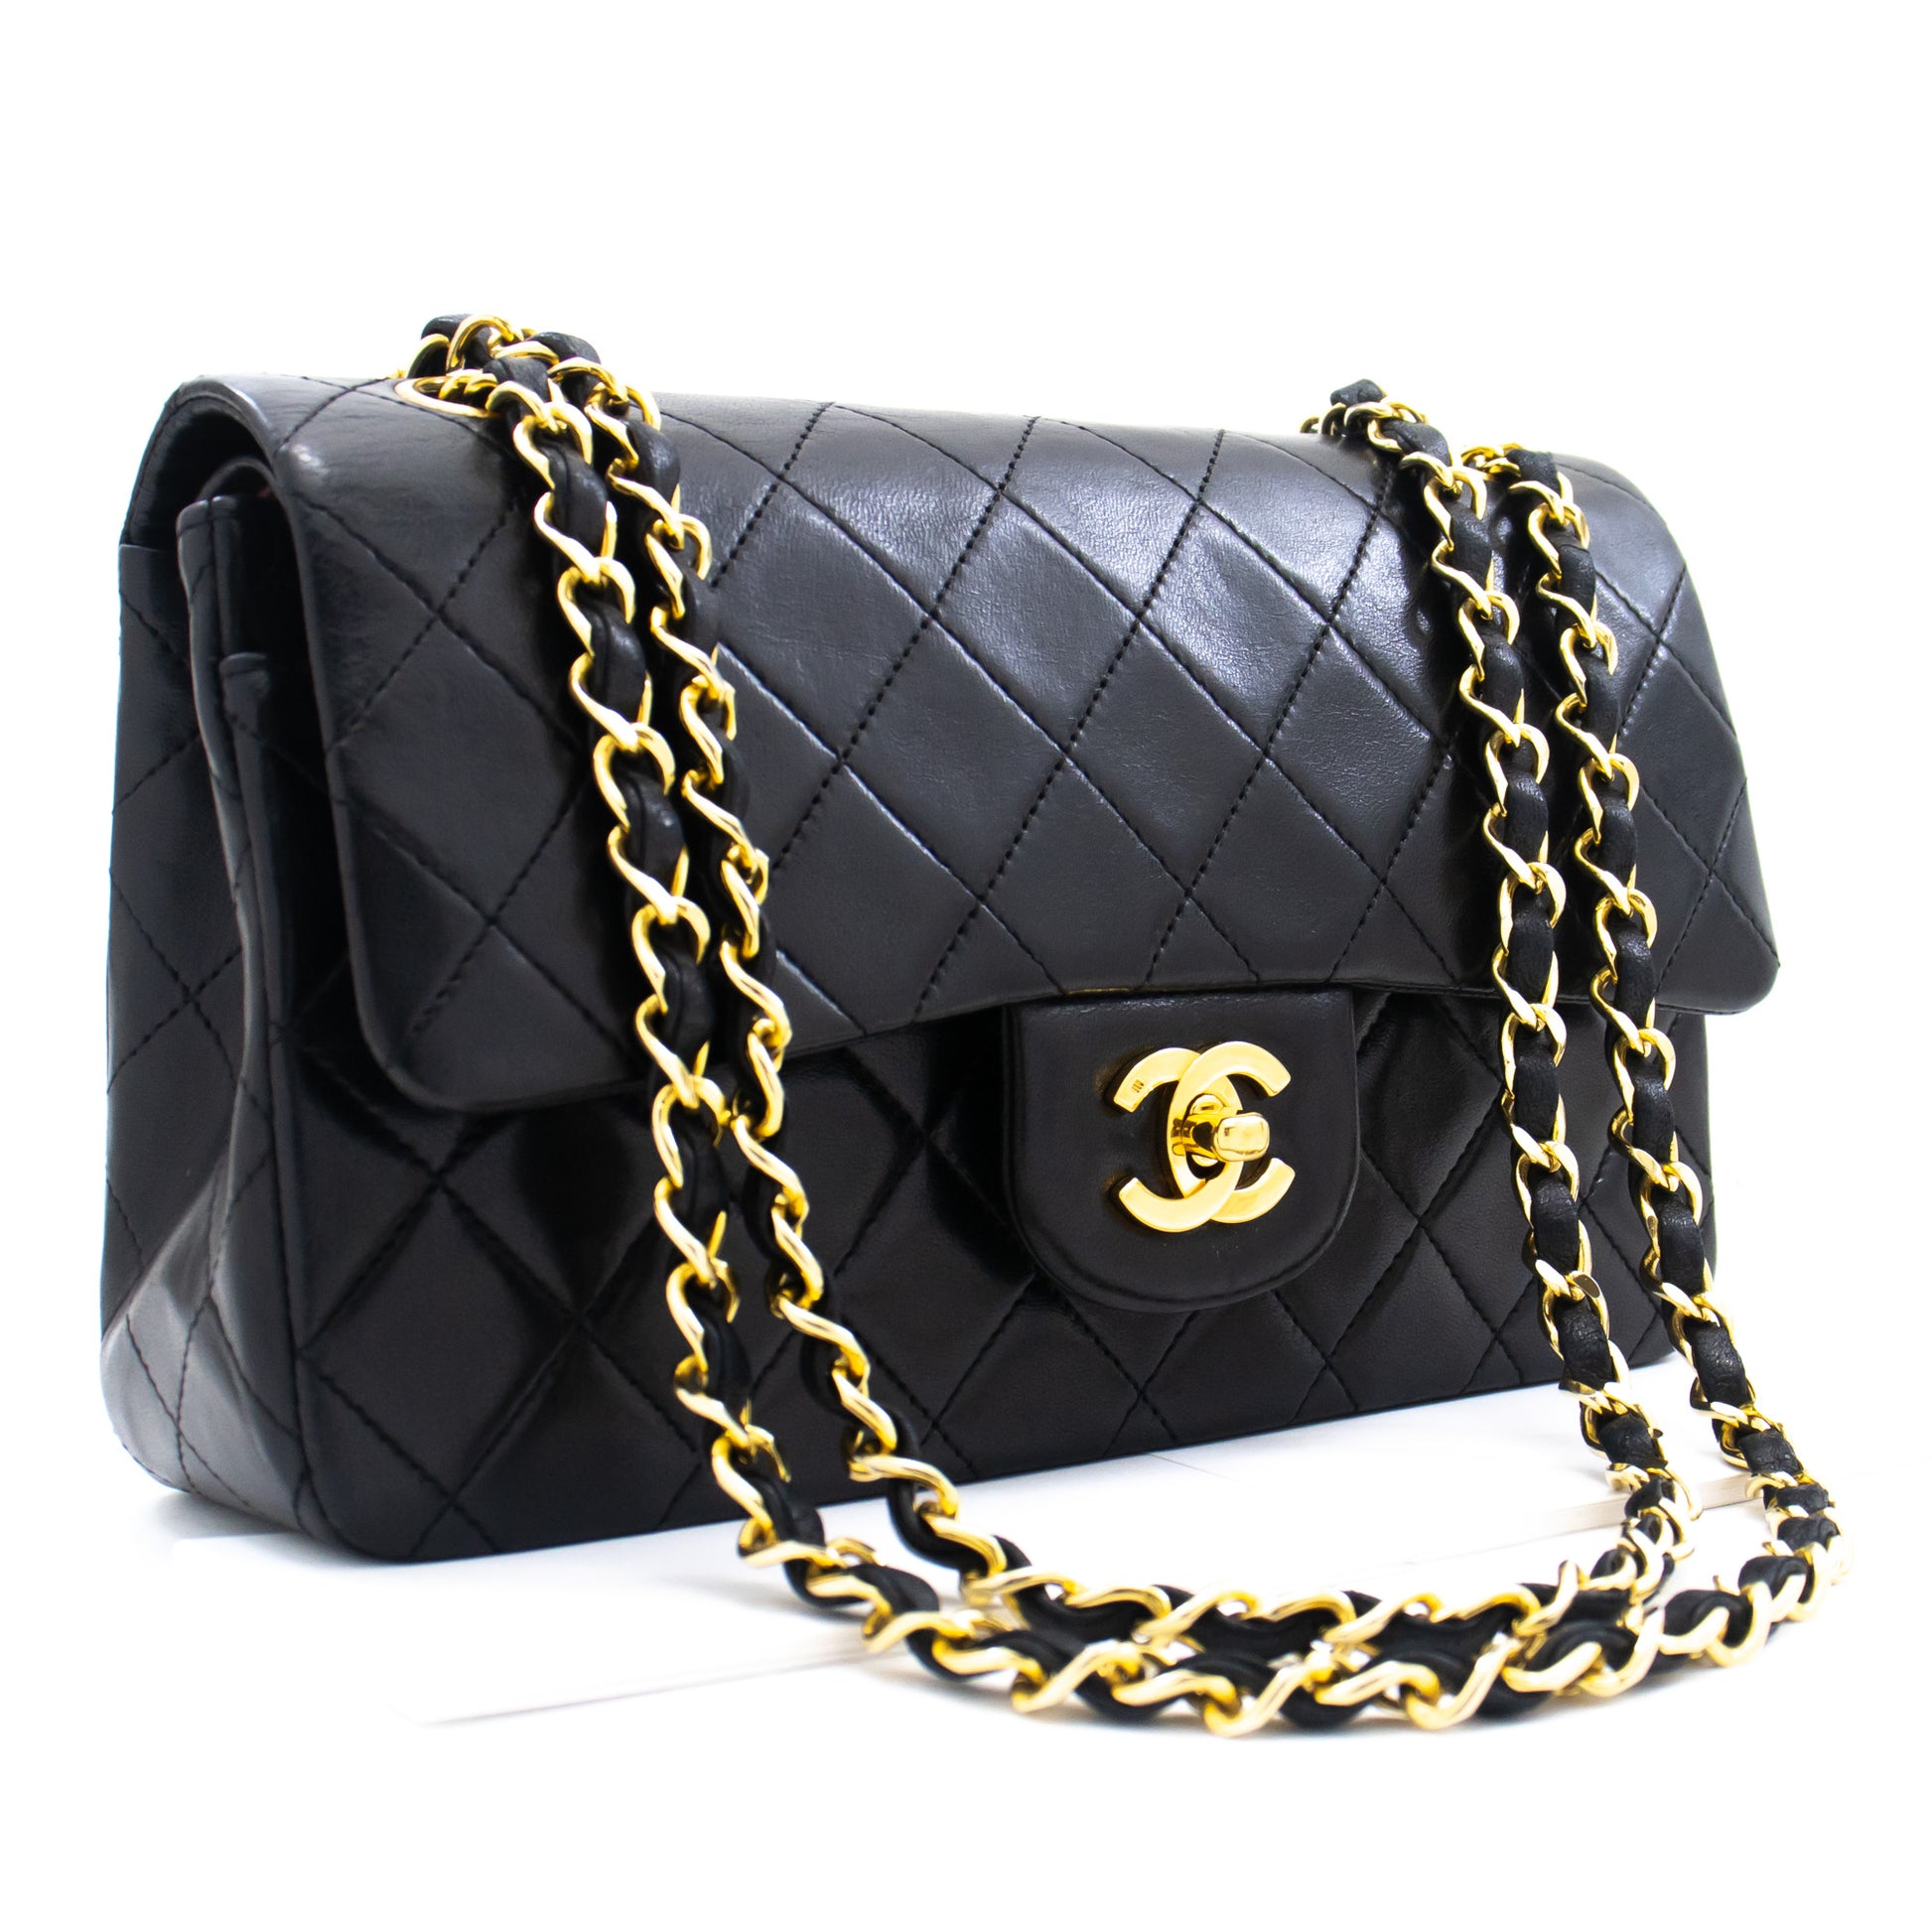 chanel flap bag new authentic